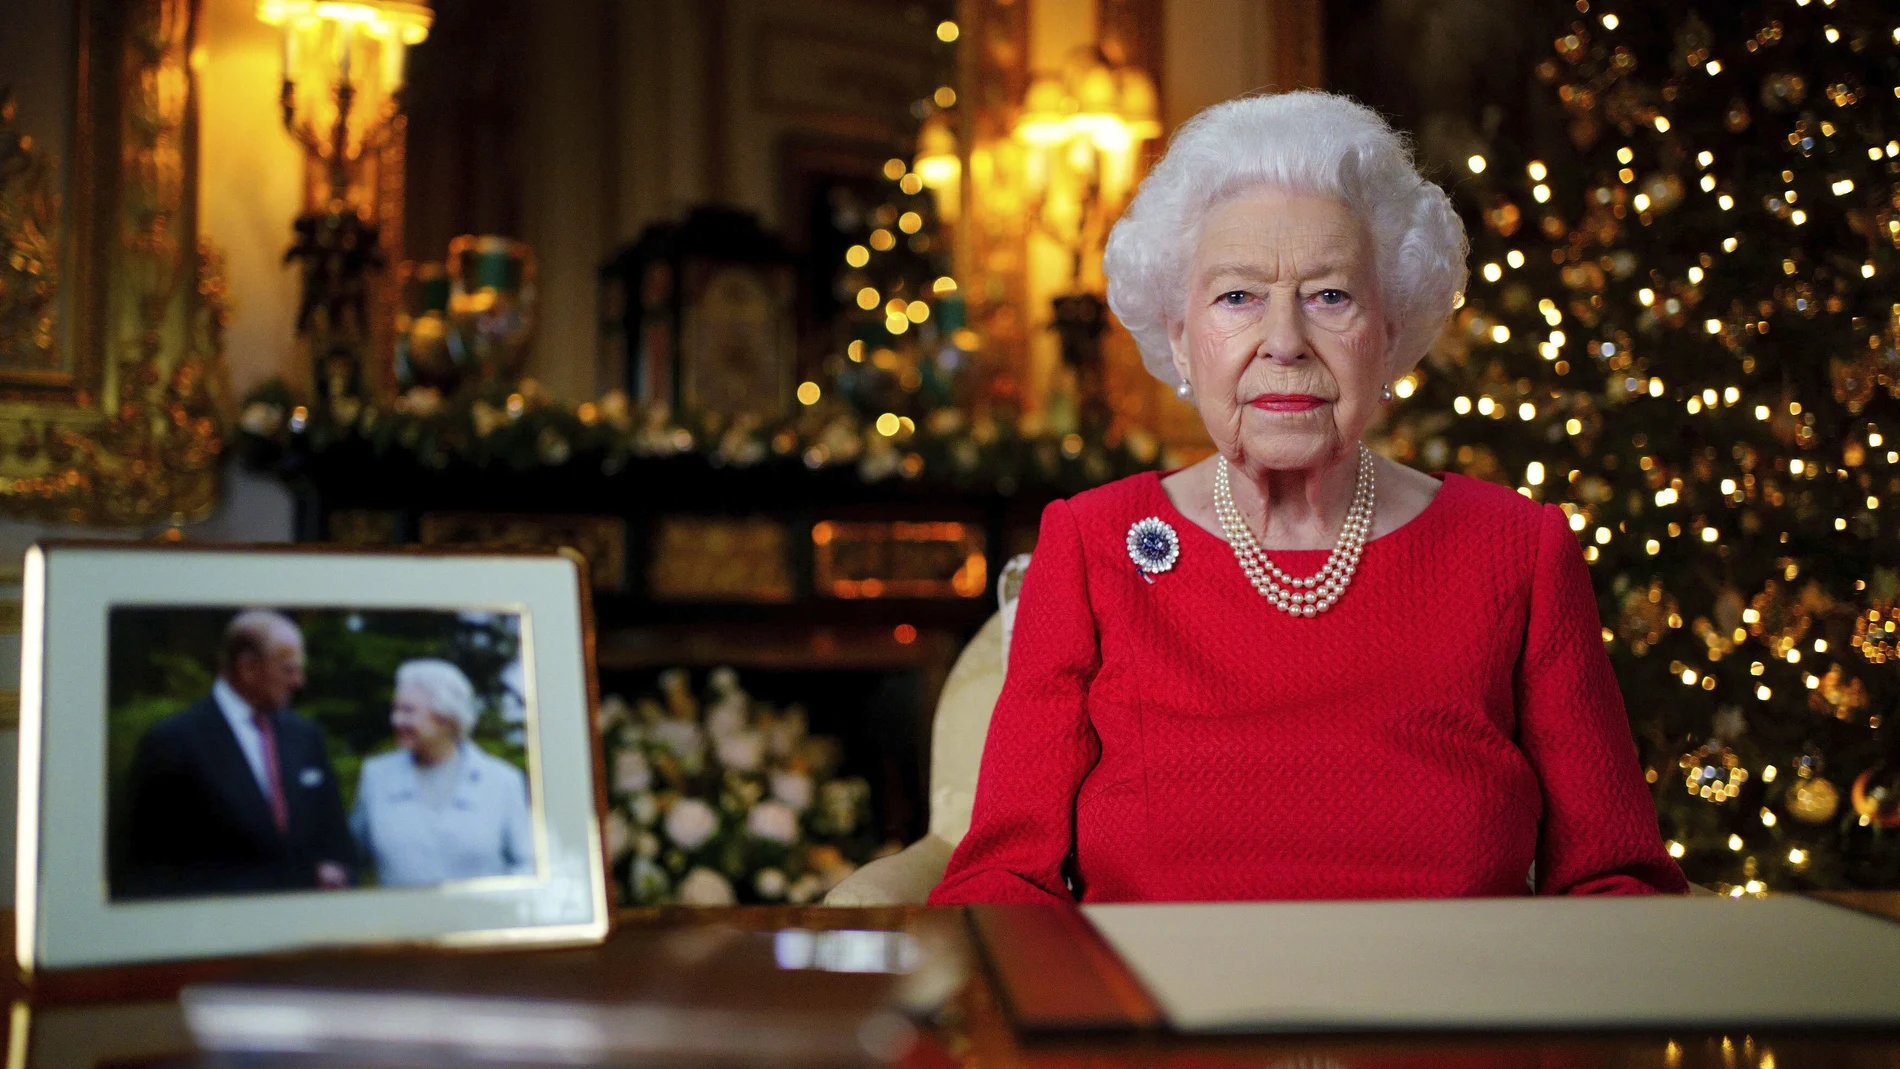 In this undated photo issued on Thursday Dec. 23, 2021, Britain's Queen Elizabeth II records her annual Christmas broadcast in Windsor Castle, Windsor, England. The photograph at left shows The Queen and Prince Philip taken in 2007 at Broadlands to mark their Diamond wedding anniversary. (Victoria Jones/Pool via AP)